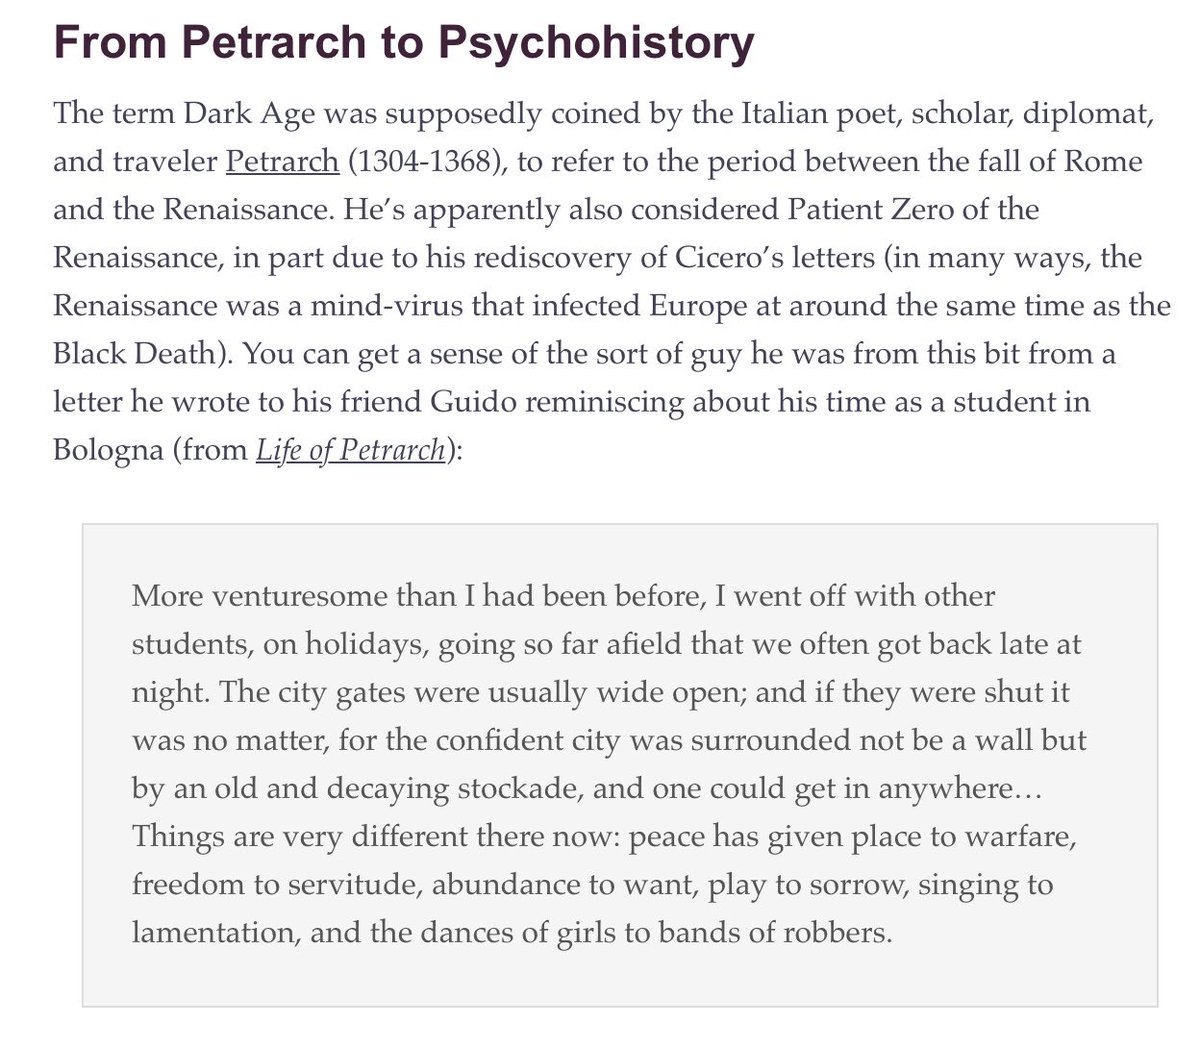 I truly get now the mood shift noted by Petrarch in Europe before/after the Black Death. Big psychohistorical turns can easily swamp personal life turns. I’m just 10 years older (36 —> 46) relative to 2007, but the world seems to have aged like 50 years.  https://www.ribbonfarm.com/2017/11/30/prolegomena-to-any-dark-age-psychohistory/